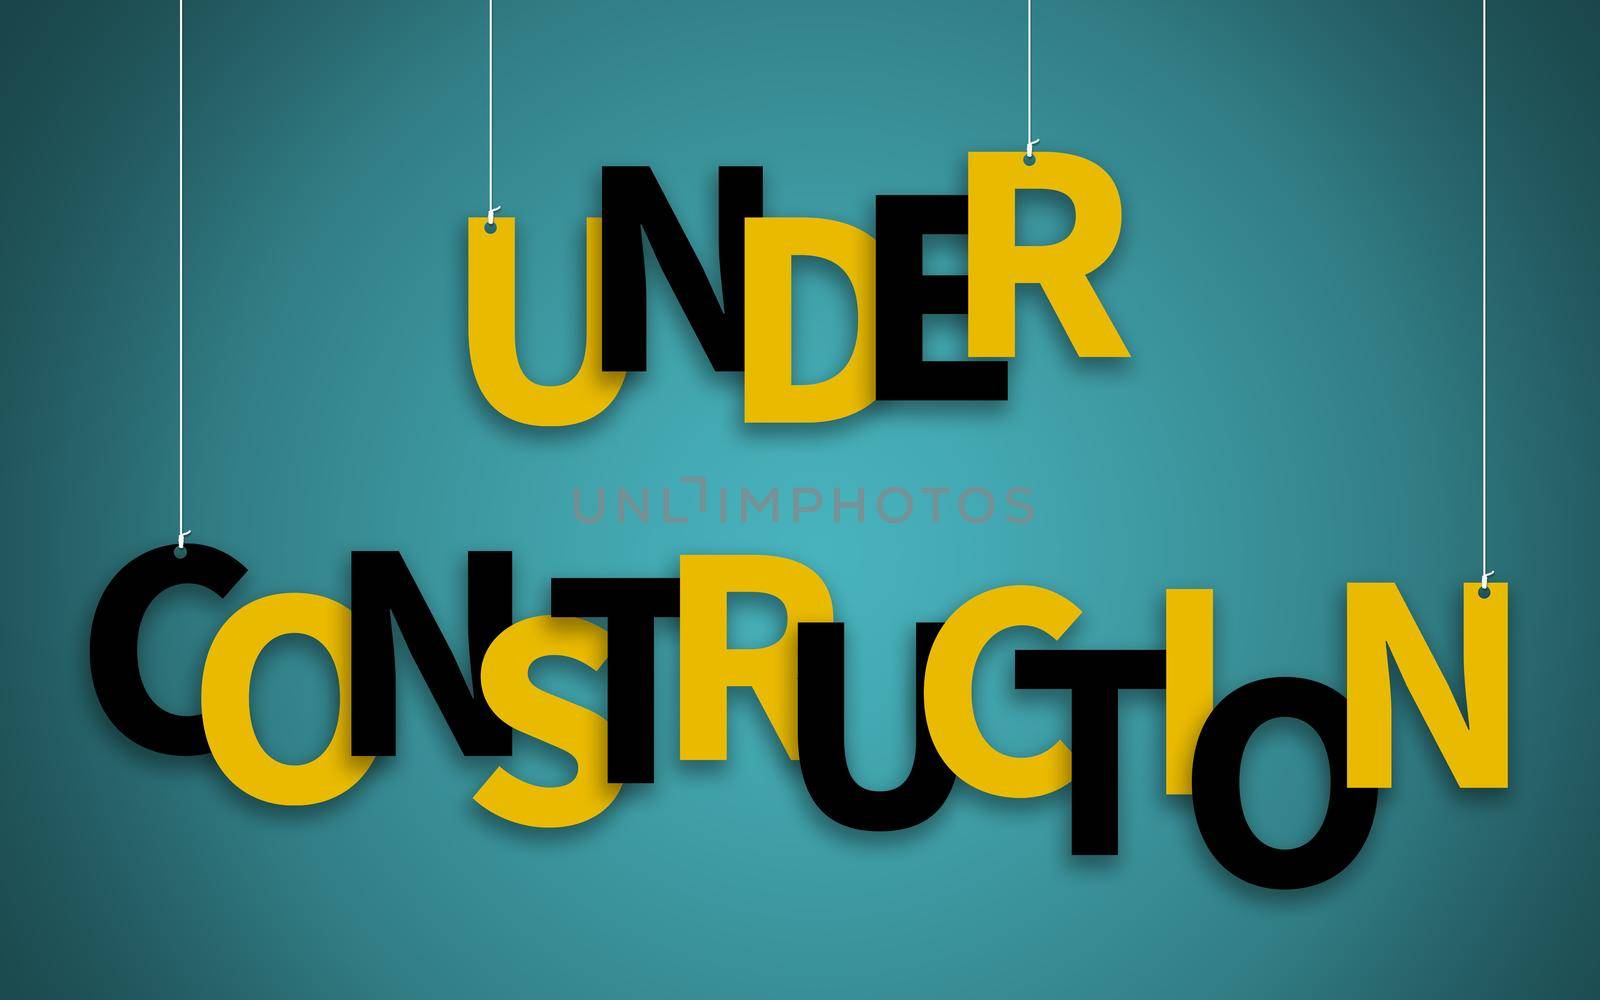 Under Construction text hanging on ropes: 3D illustration